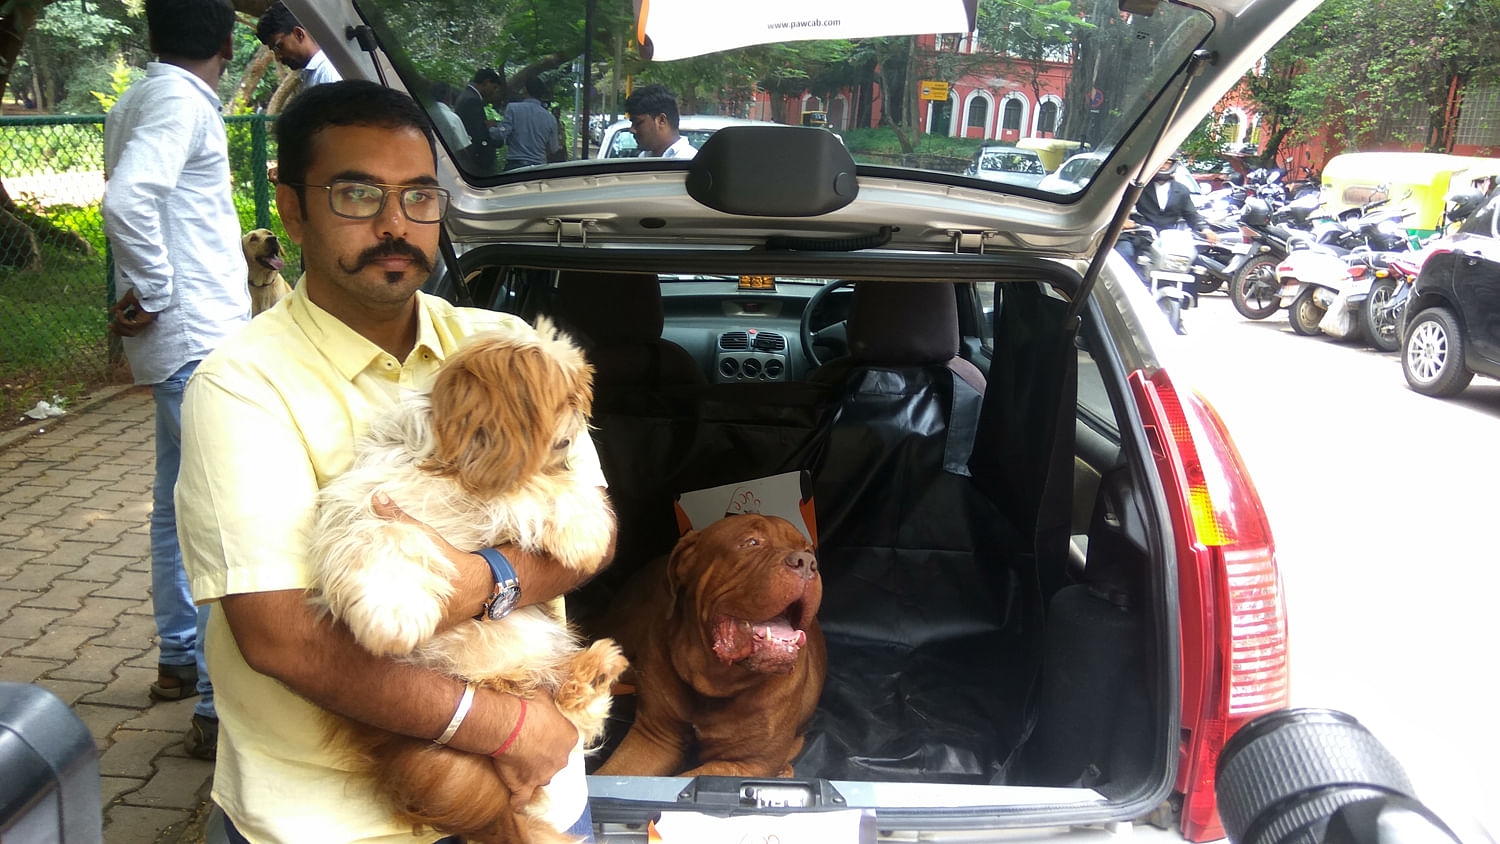 Amrut Sridhar Hiranya, founder of Paw Cab, an app-based cab service for transporting pets in Bengaluru on Wednesday. His partner Ravi Srivatsa is also seen. DH photo/Janardhan B K